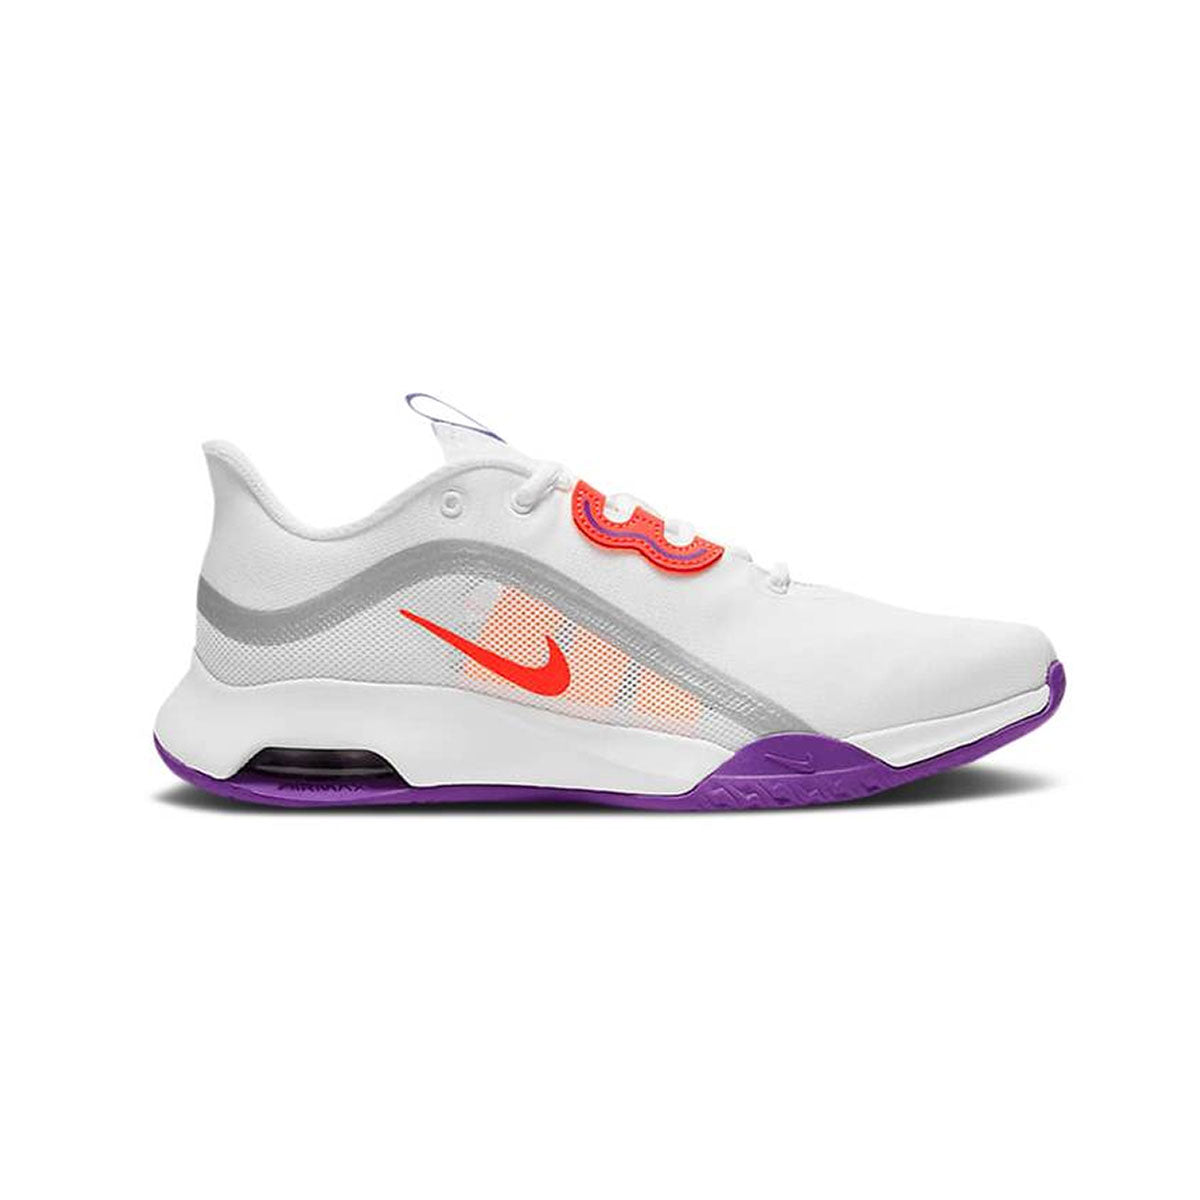 Nike Women's Court Air Max Volley